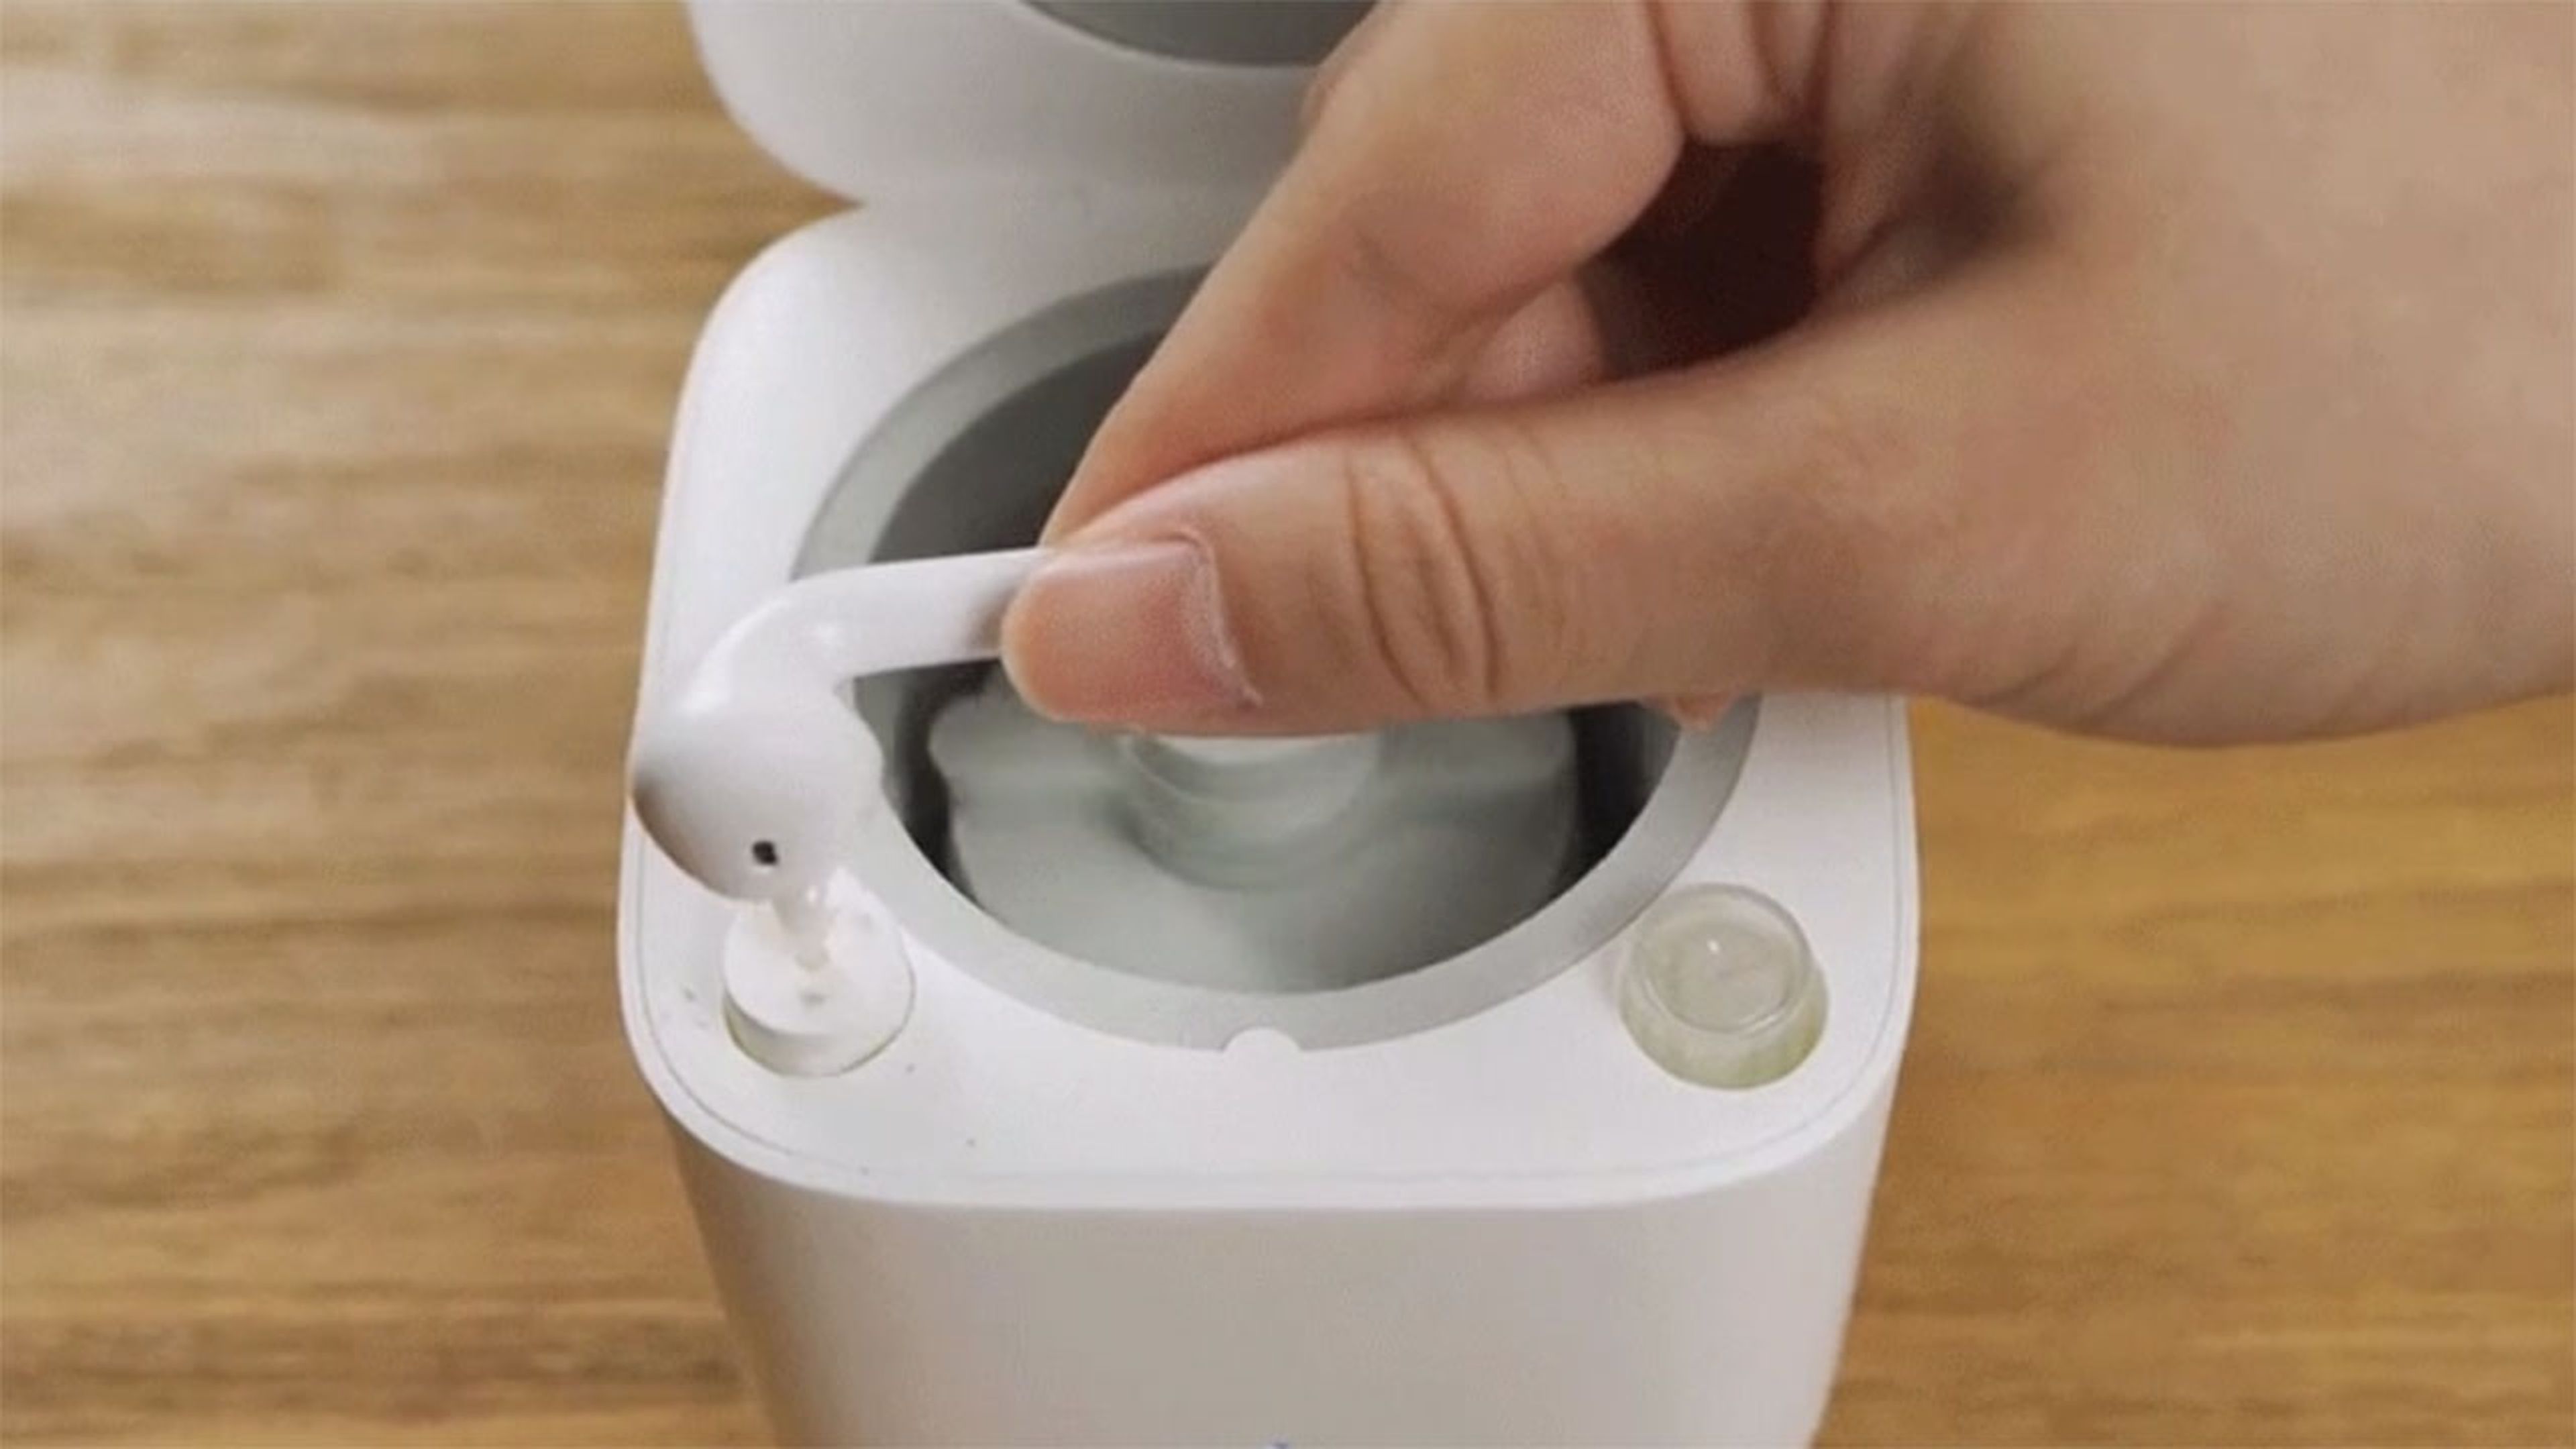 Cardlax EarBuds Washer